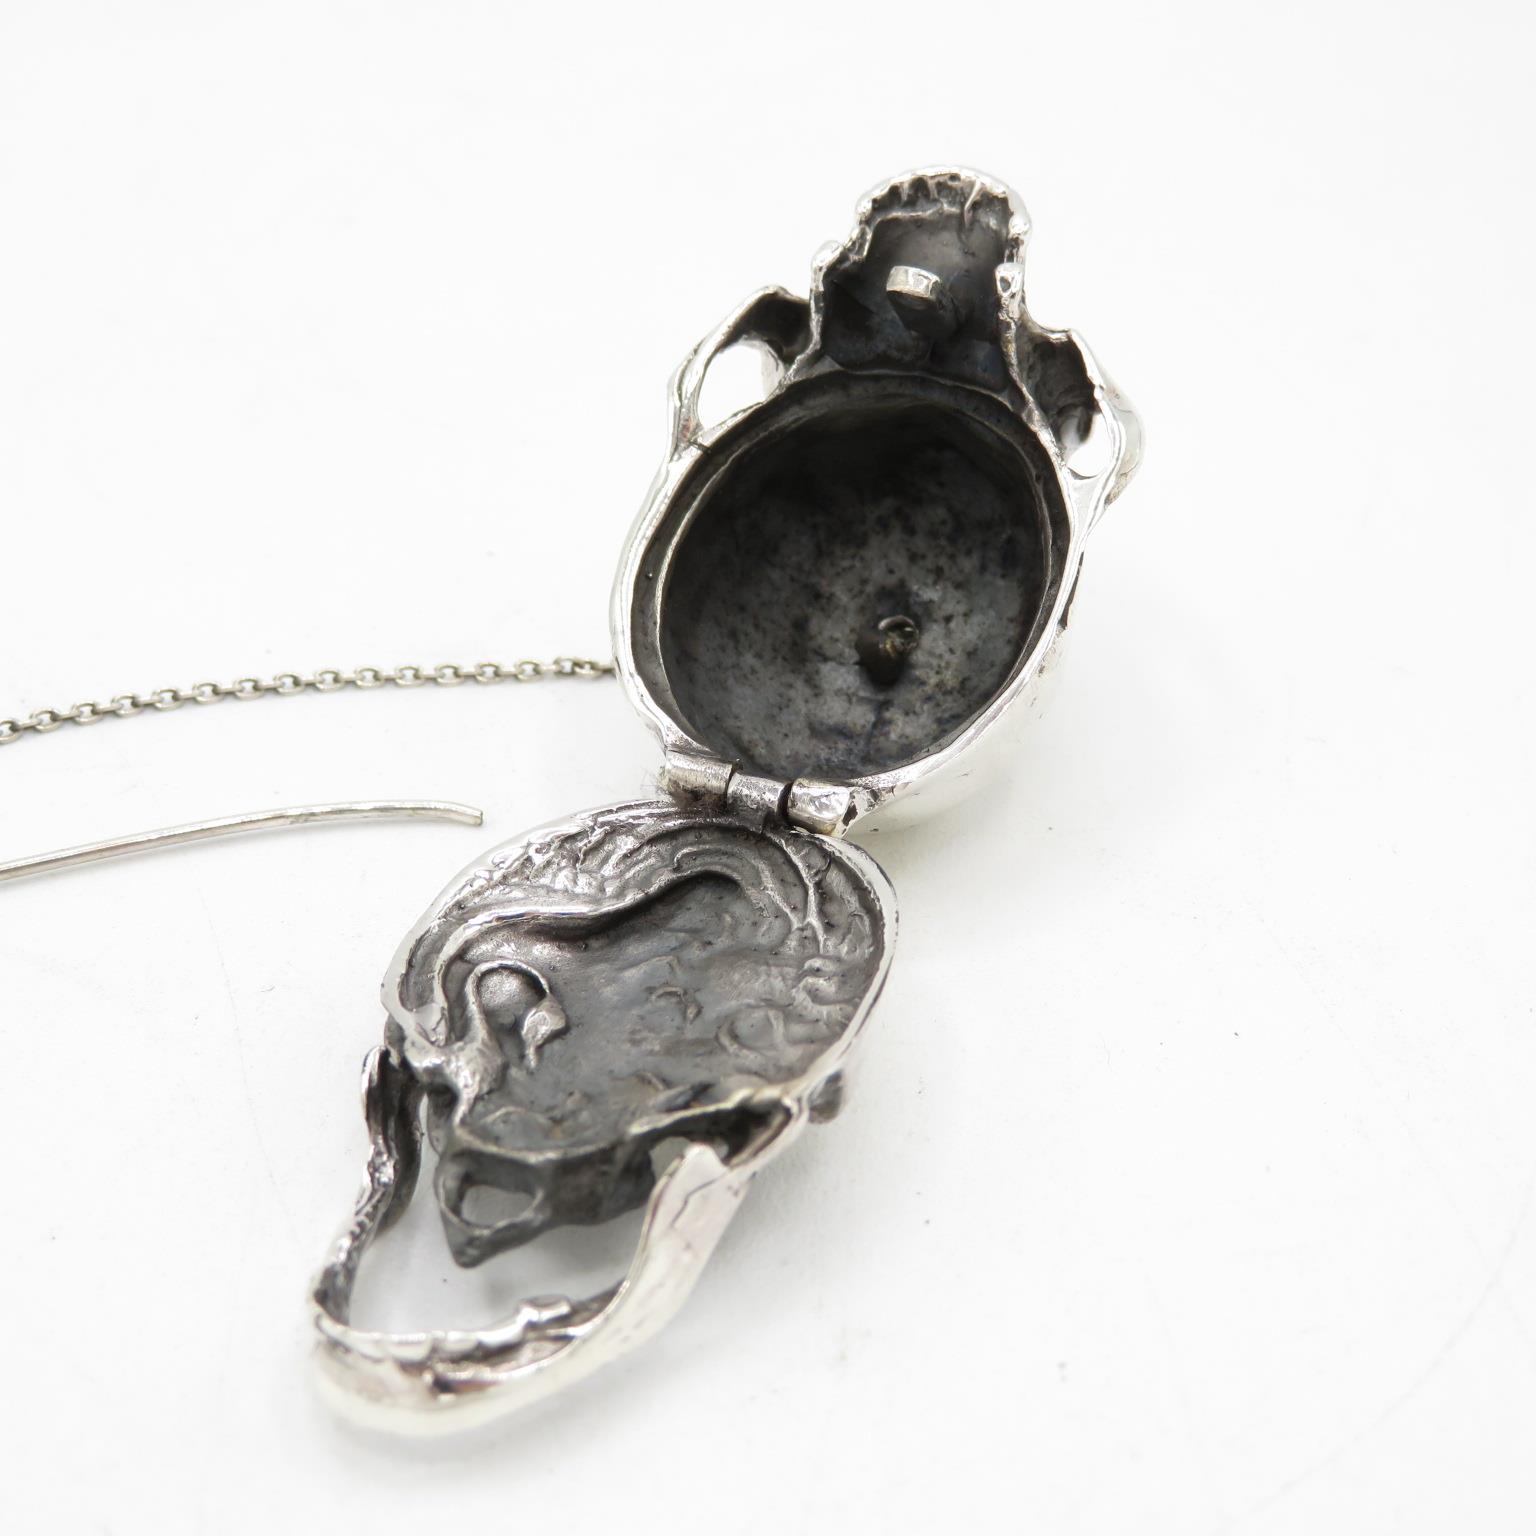 Extremely fine detailed articulated Memento Mori human skull in sterling silver with hinged bottom - Image 5 of 6